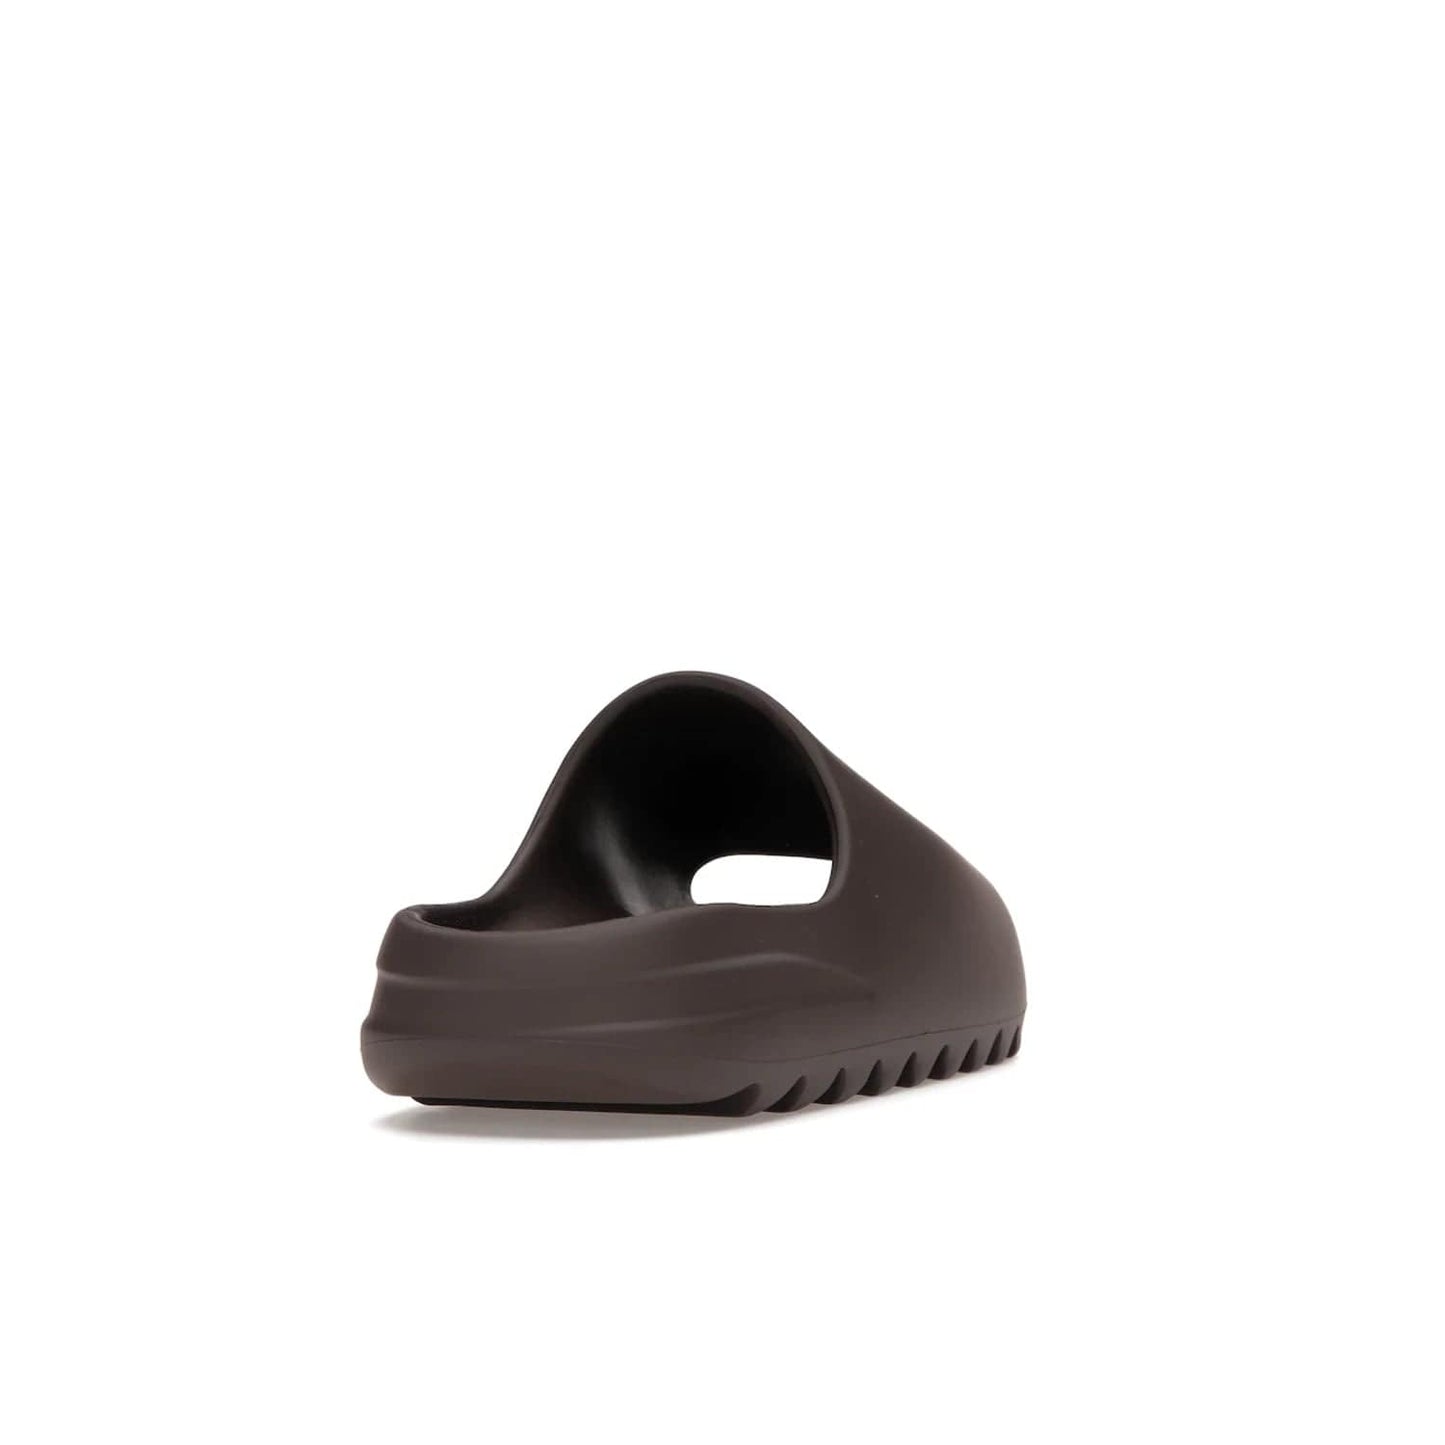 adidas Yeezy Slide Soot - Image 30 - Only at www.BallersClubKickz.com - Shop the Yeezy Slide Soot sneaker by Adidas, a sleek blend of form and function. Monochrome silhouette in Soot/Soot/Soot. Lightweight EVA foam offers comfort and durability. Get the must-have style today.